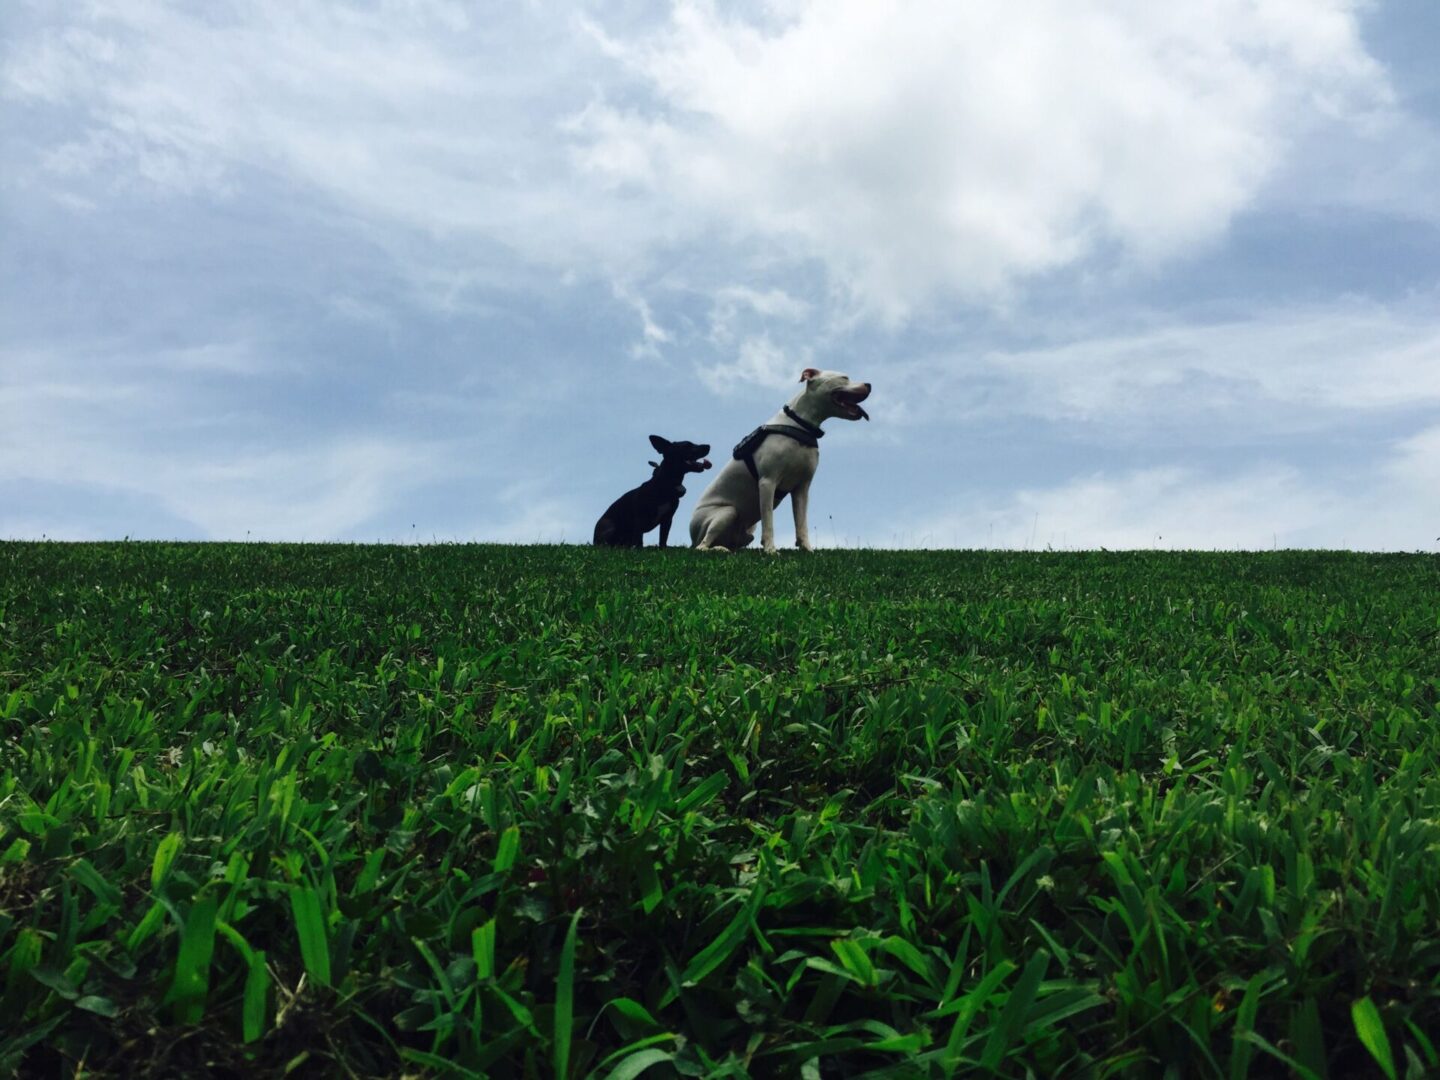 Two well behaved dogs in the grass